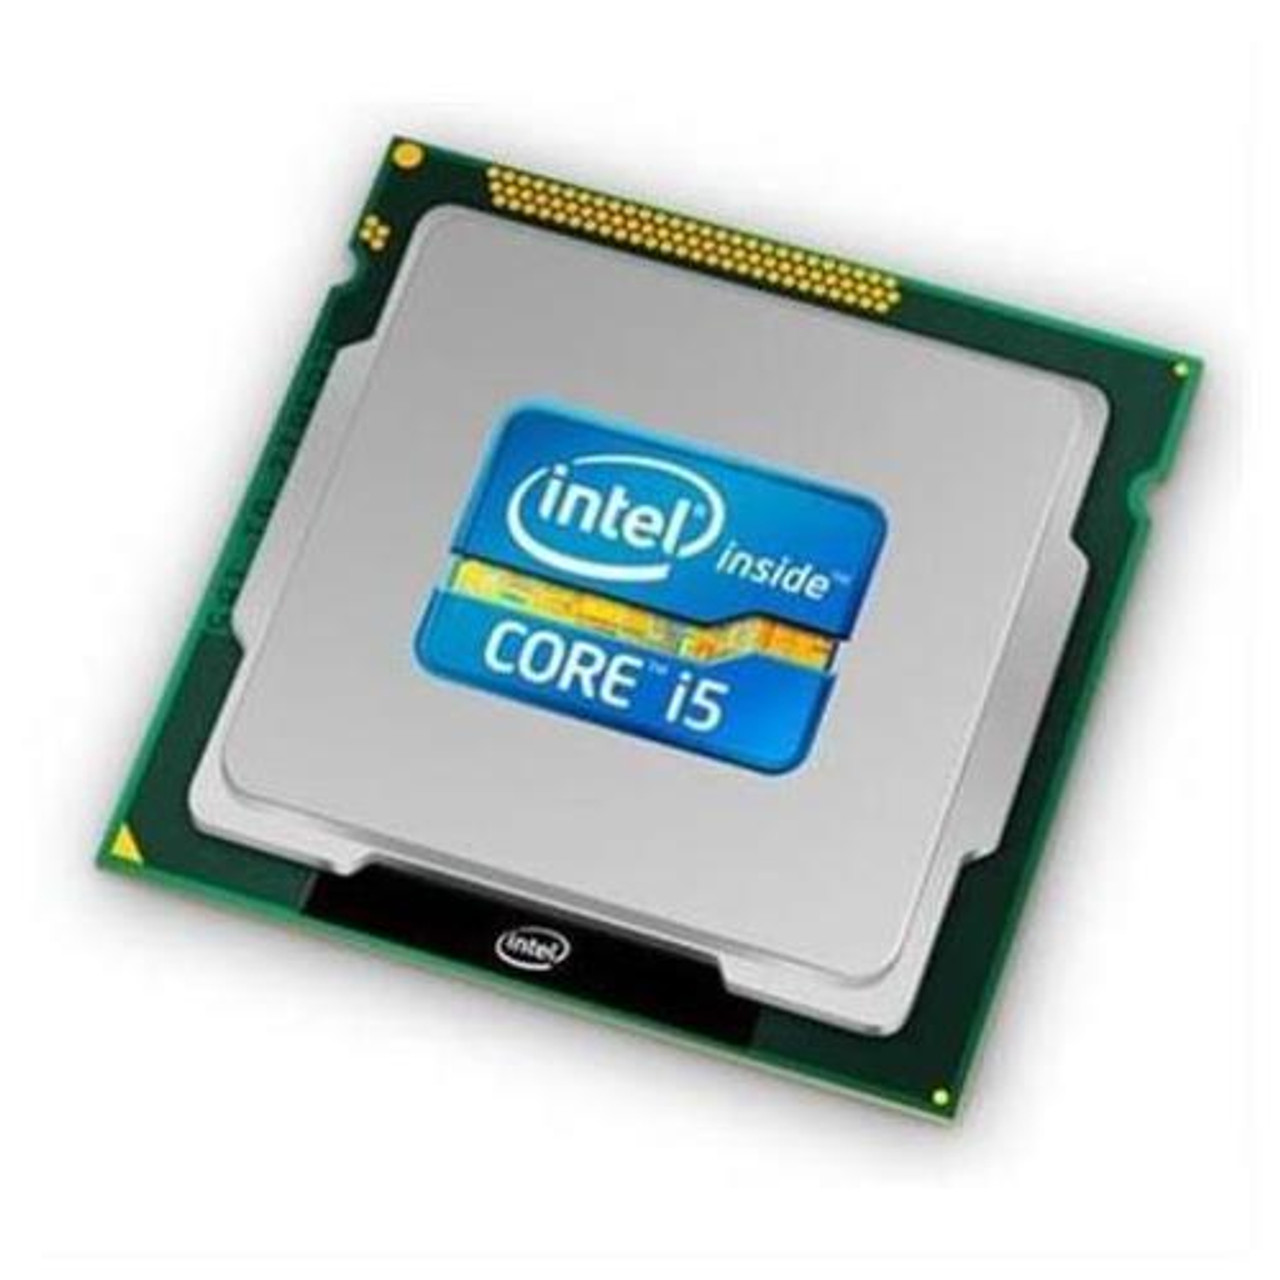 013M23 Dell Core i5 Mobile 2.53 GHz Processor Unboxed OEM